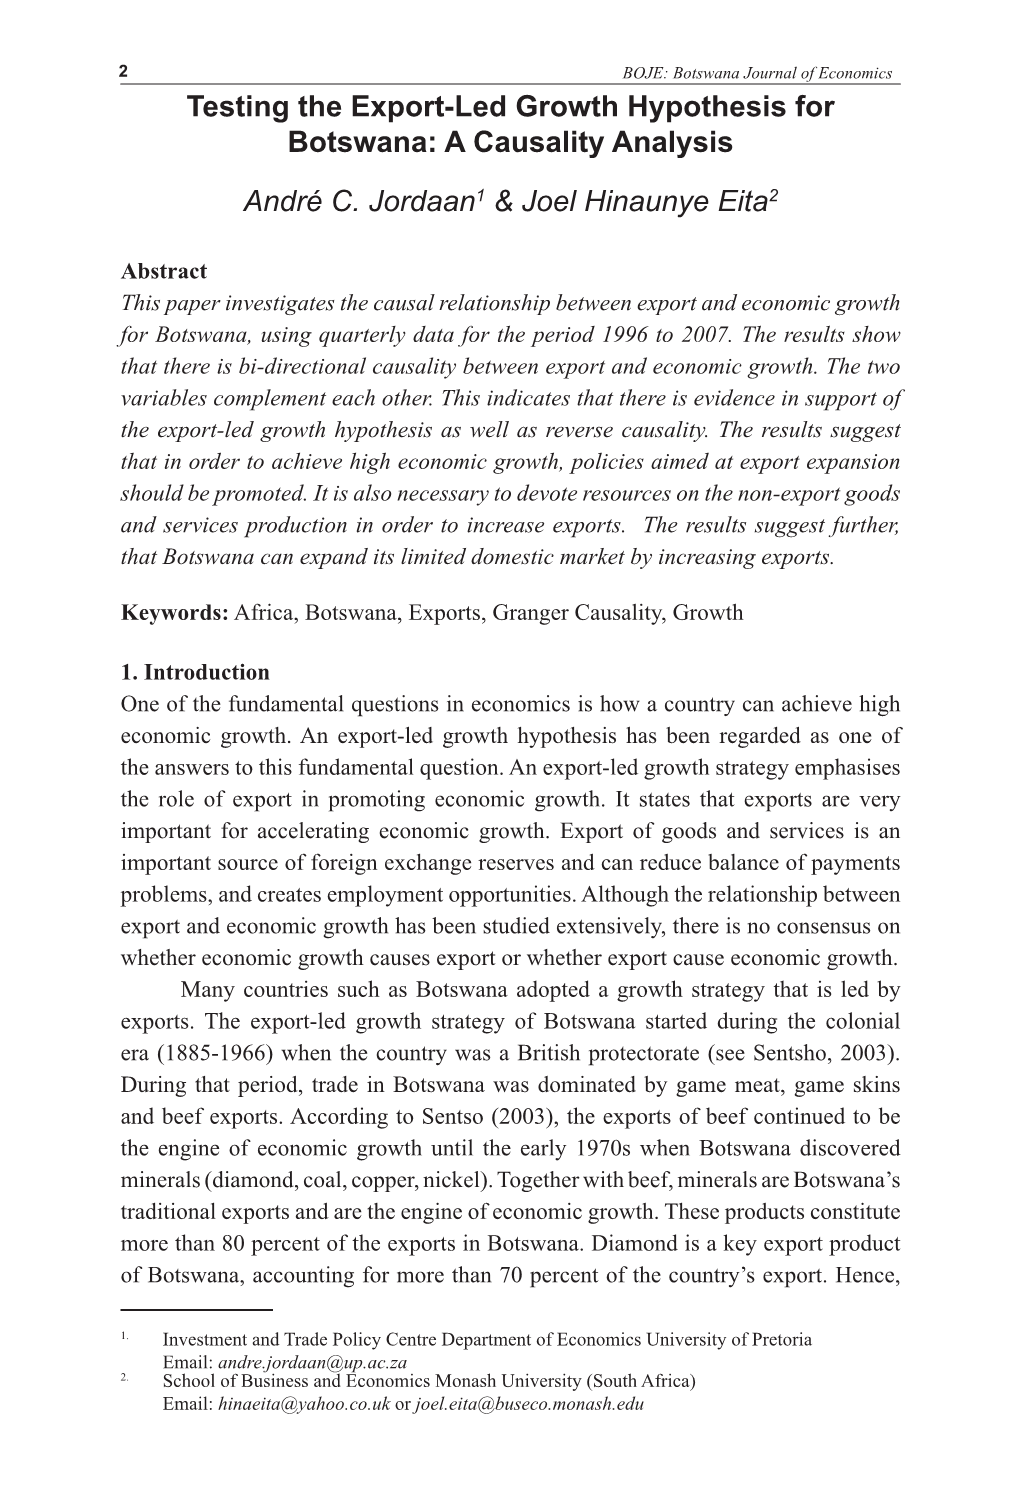 Testing the Export-Led Growth Hypothesis for Botswana: a Causality Analysis André C